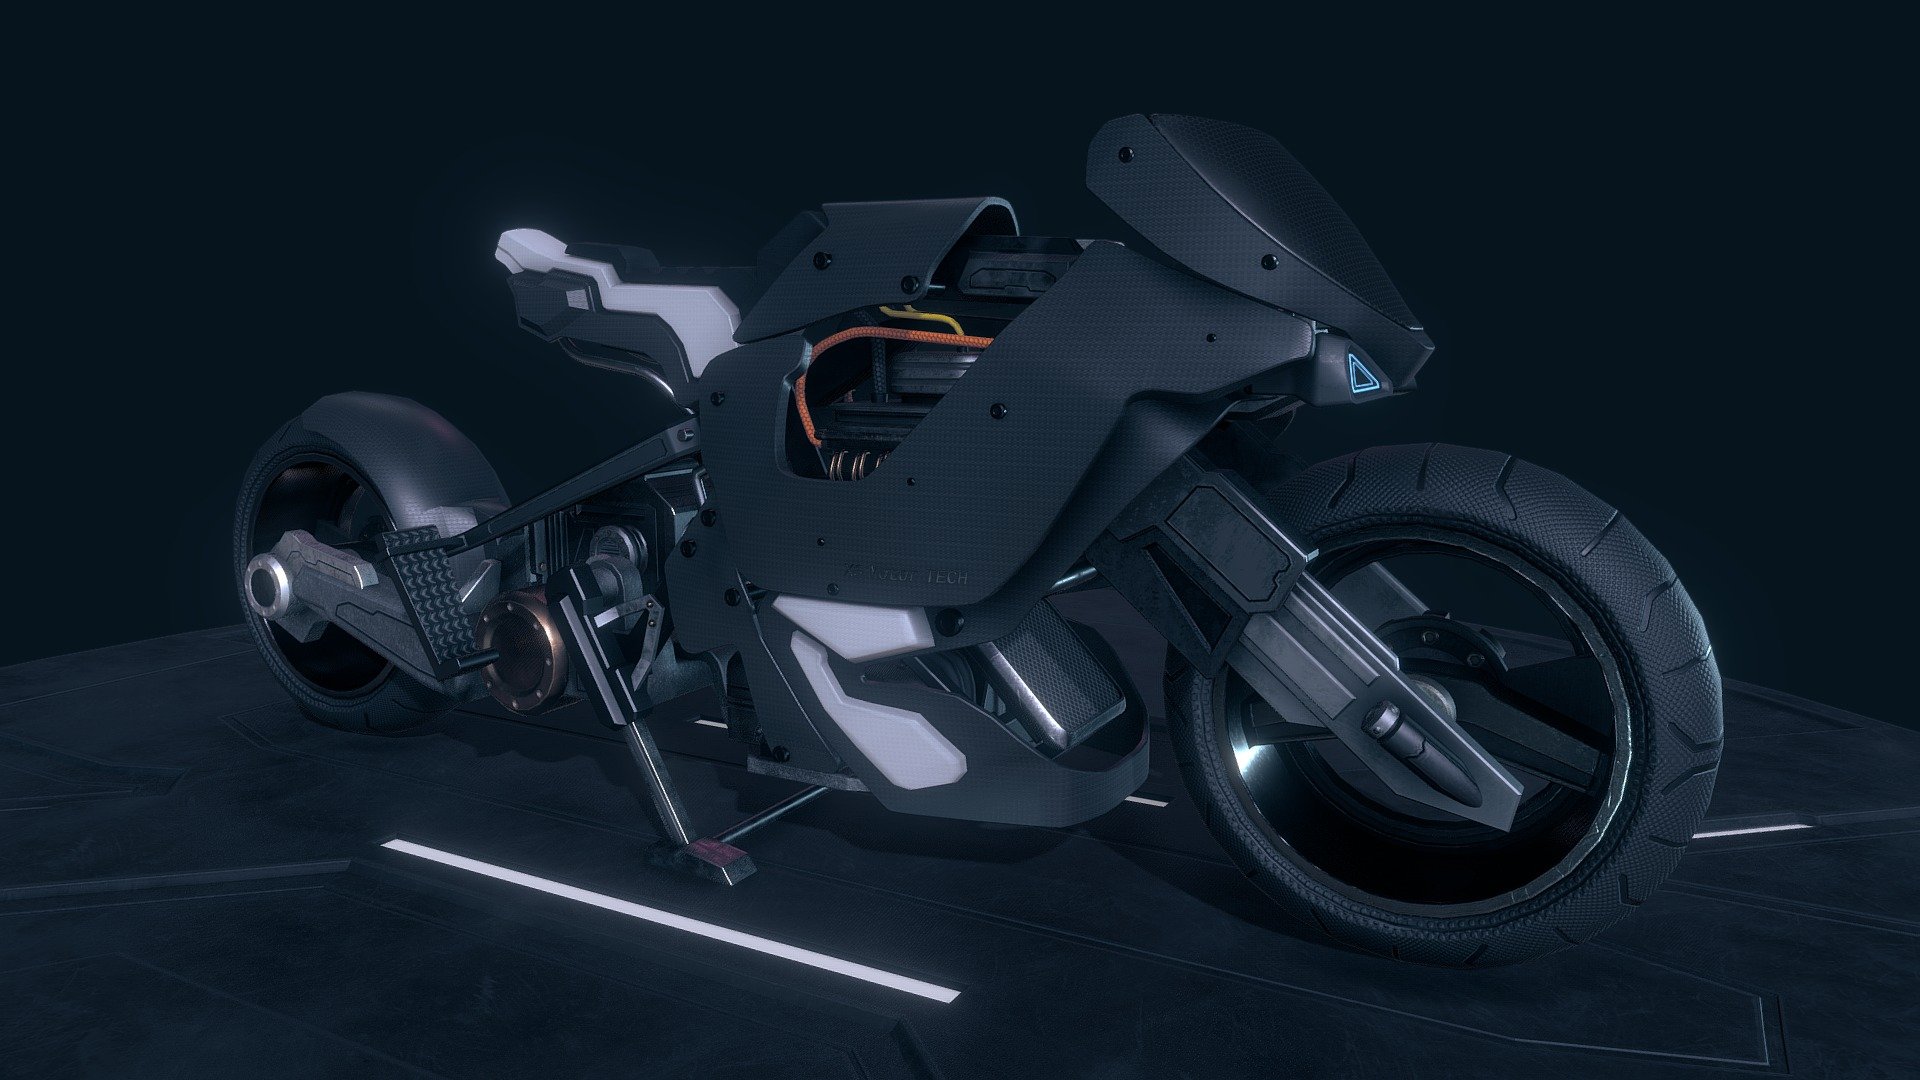 Prototype of a high-tech electric motorcycle using 3DsMax for modeling, 3D-Coat for texture.
4 shaders 4k: frame / fairings / motor / wheels - XS Motor Tech - Buy Royalty Free 3D model by carlito69 (charles coureau) (@carlito69) 3d model